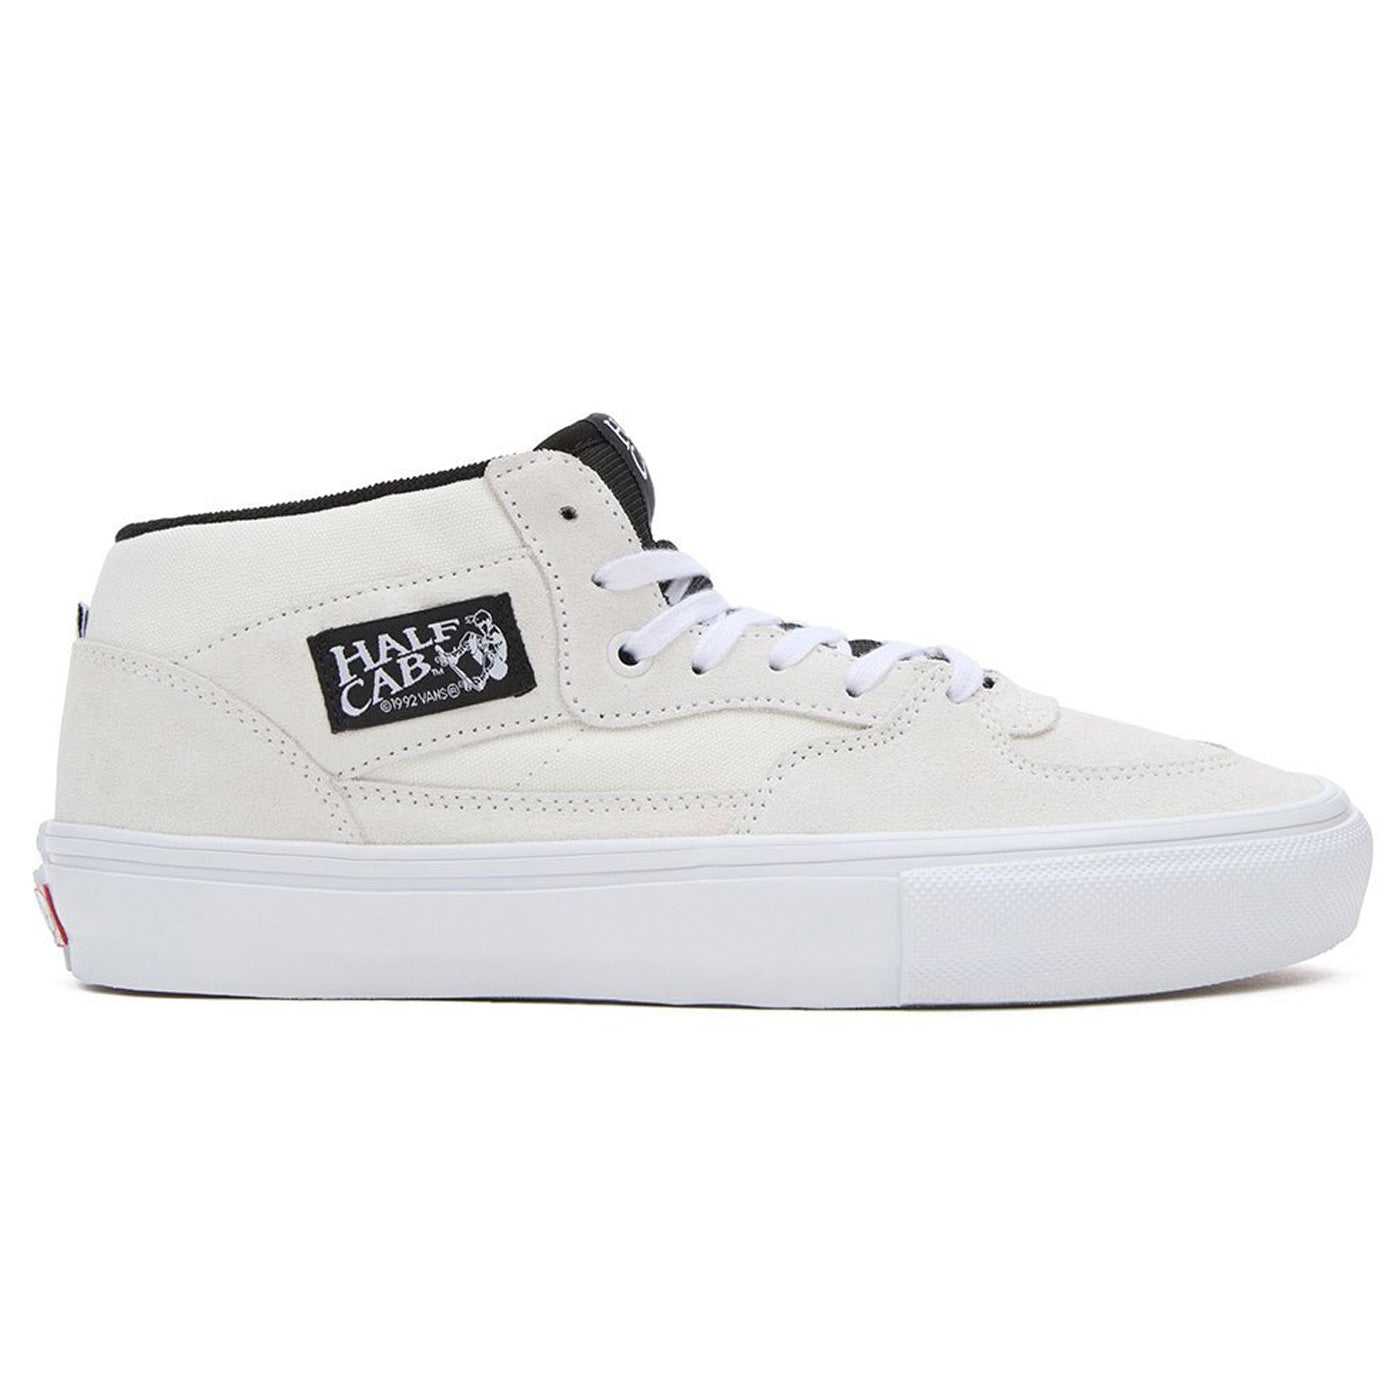 white half cab vans mid top laced skate shoes with white sole and black tongue. Free uk shipping over £50